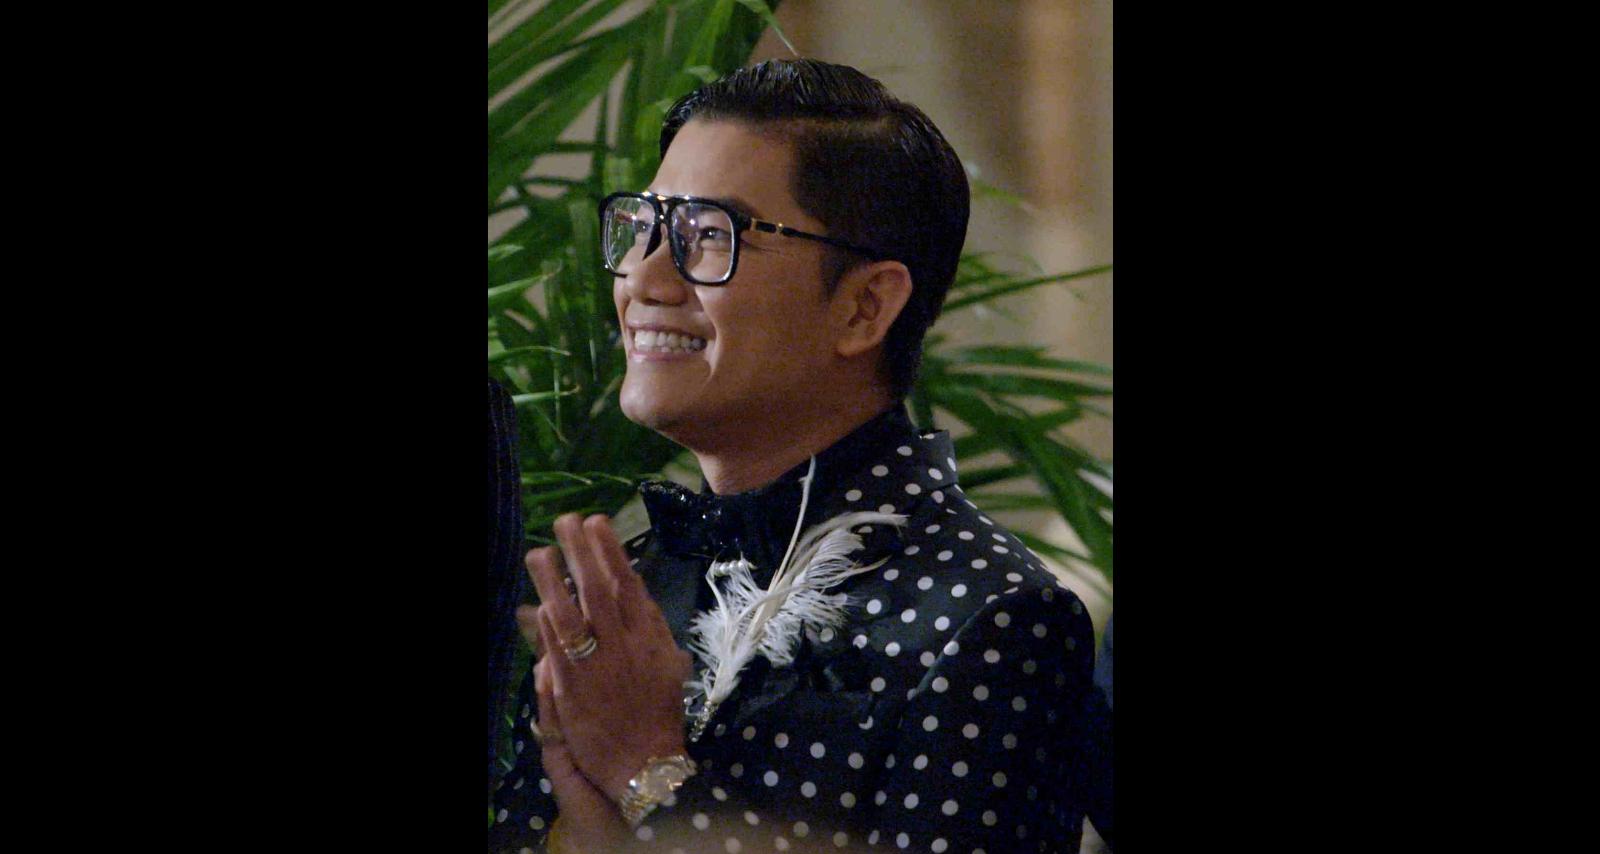 Thai Nguyen Wiki, Age, Vietnamese and Facts about the Fashion Designer on Netflix’s “Say I Do”